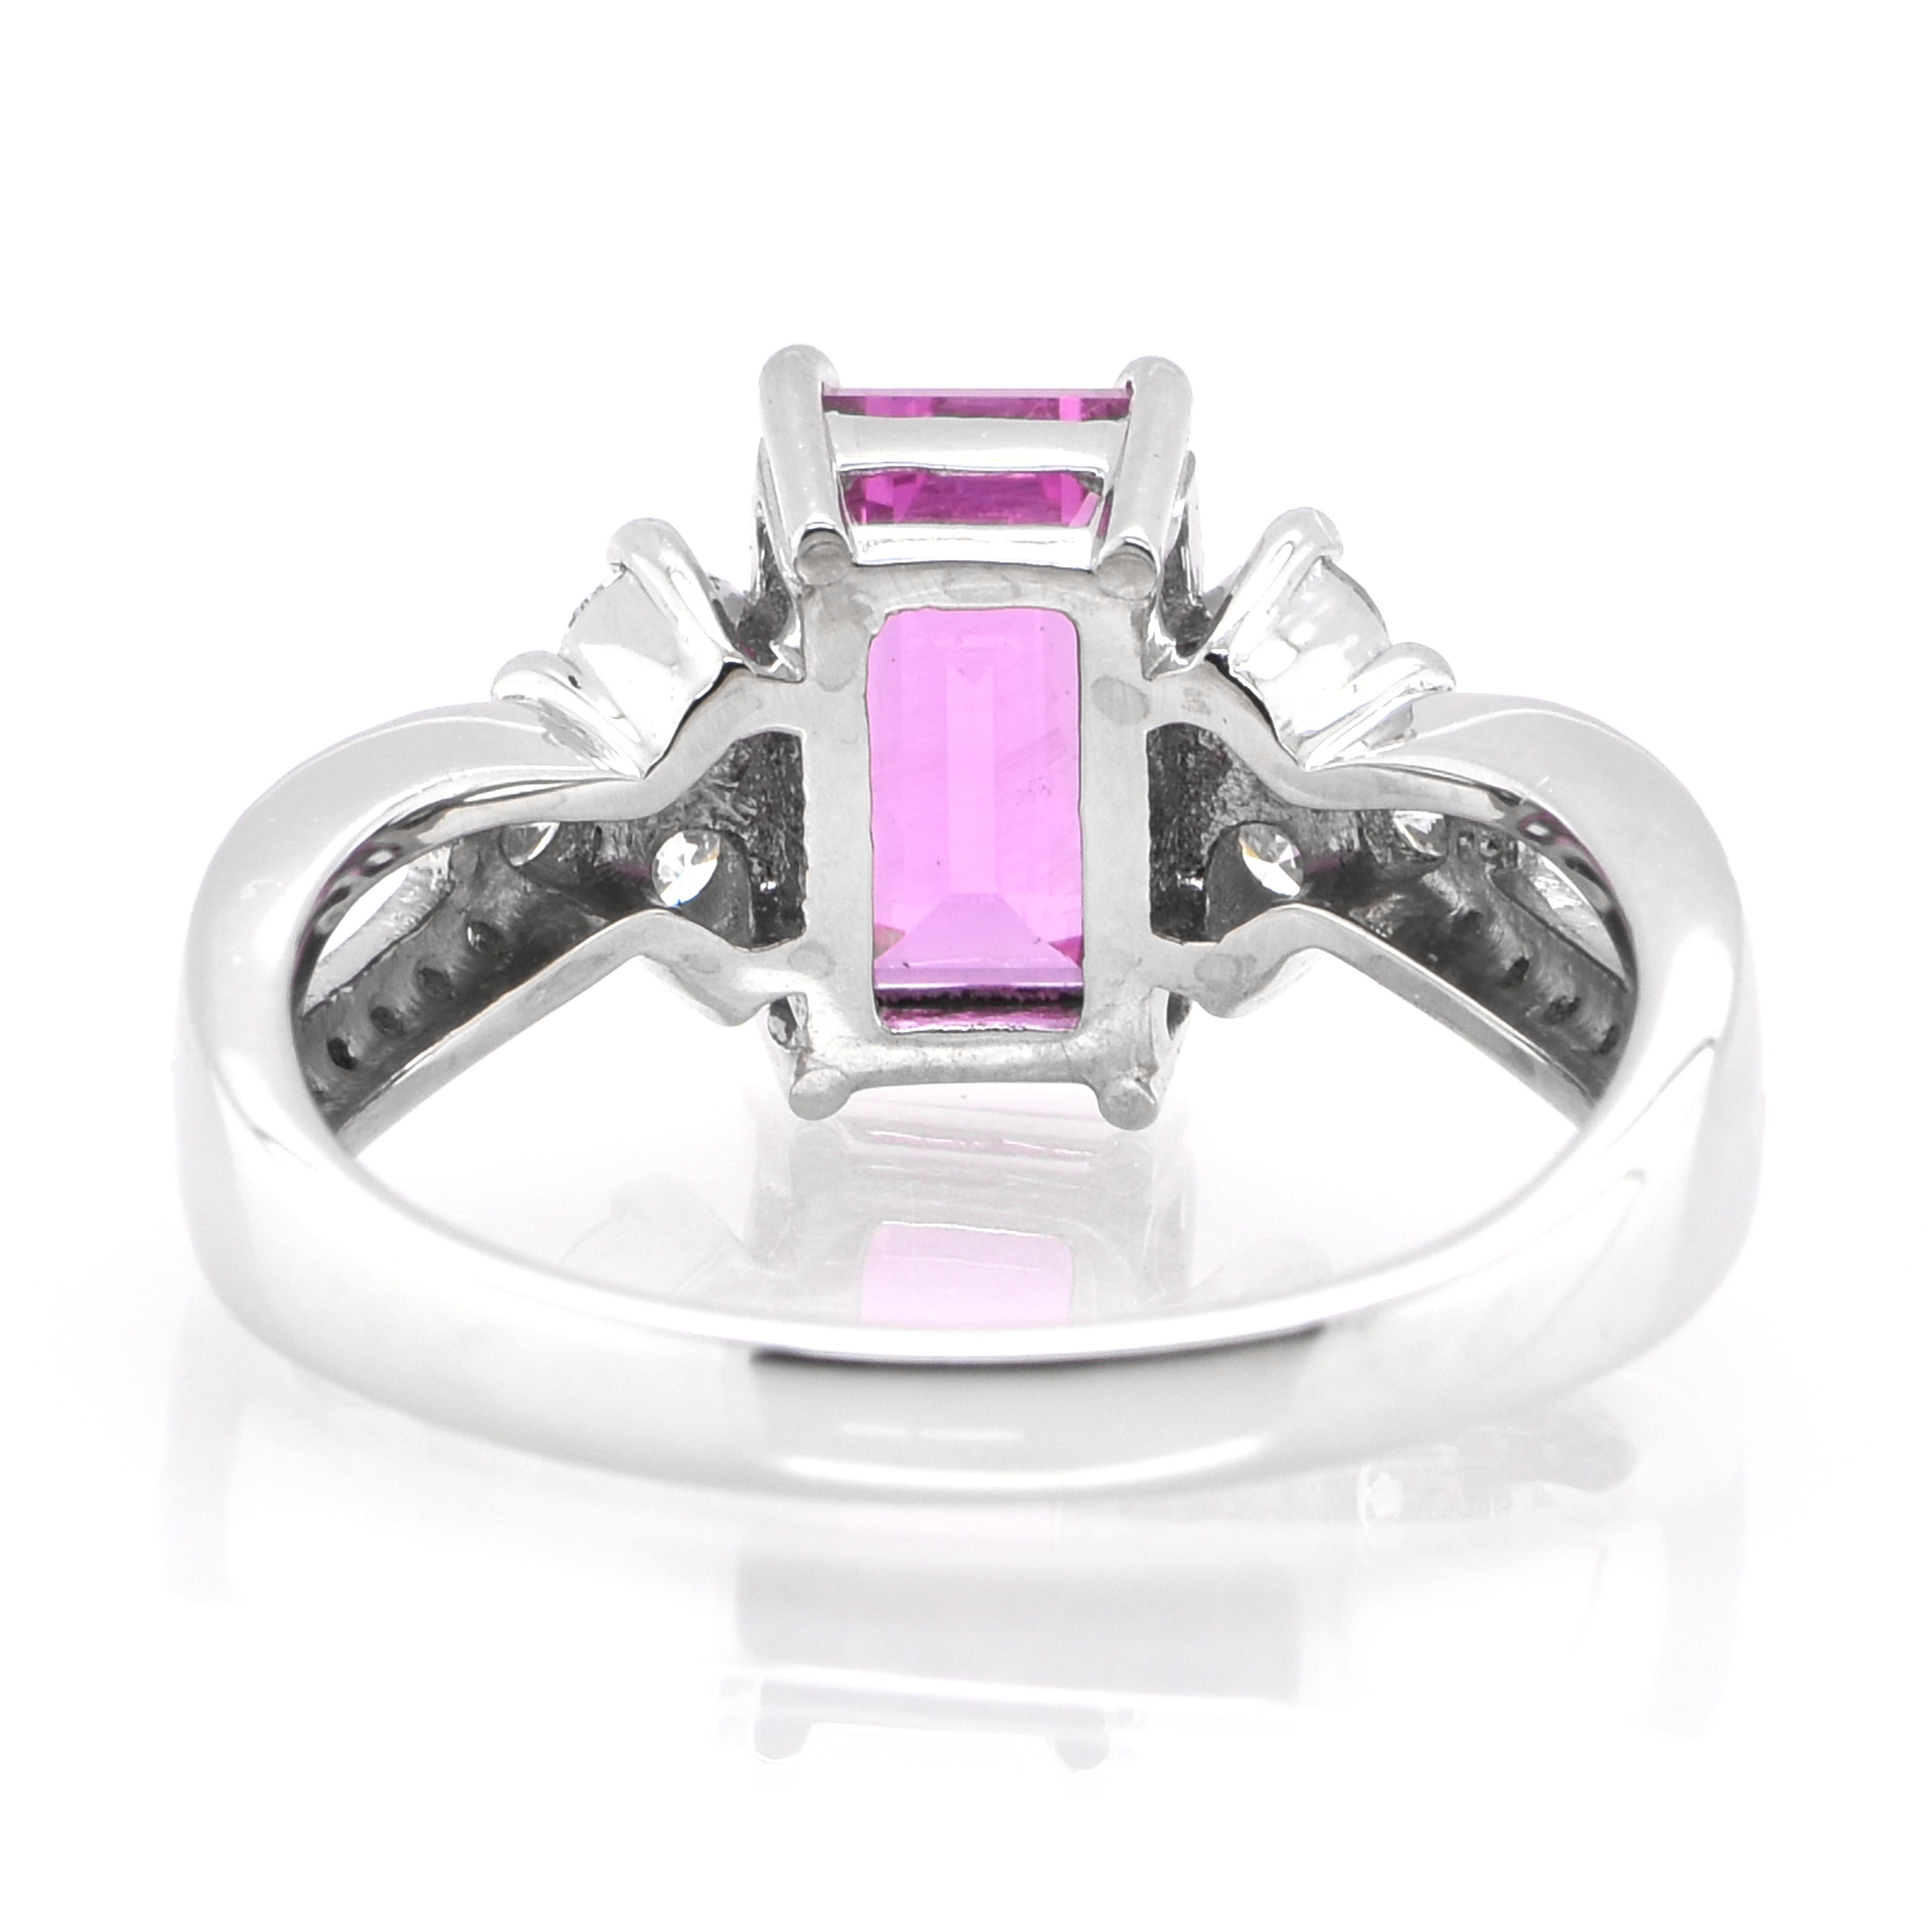 Women's GIA Certified 2.56 Carat Natural Pink Sapphire and Diamond Ring Set in Platinum